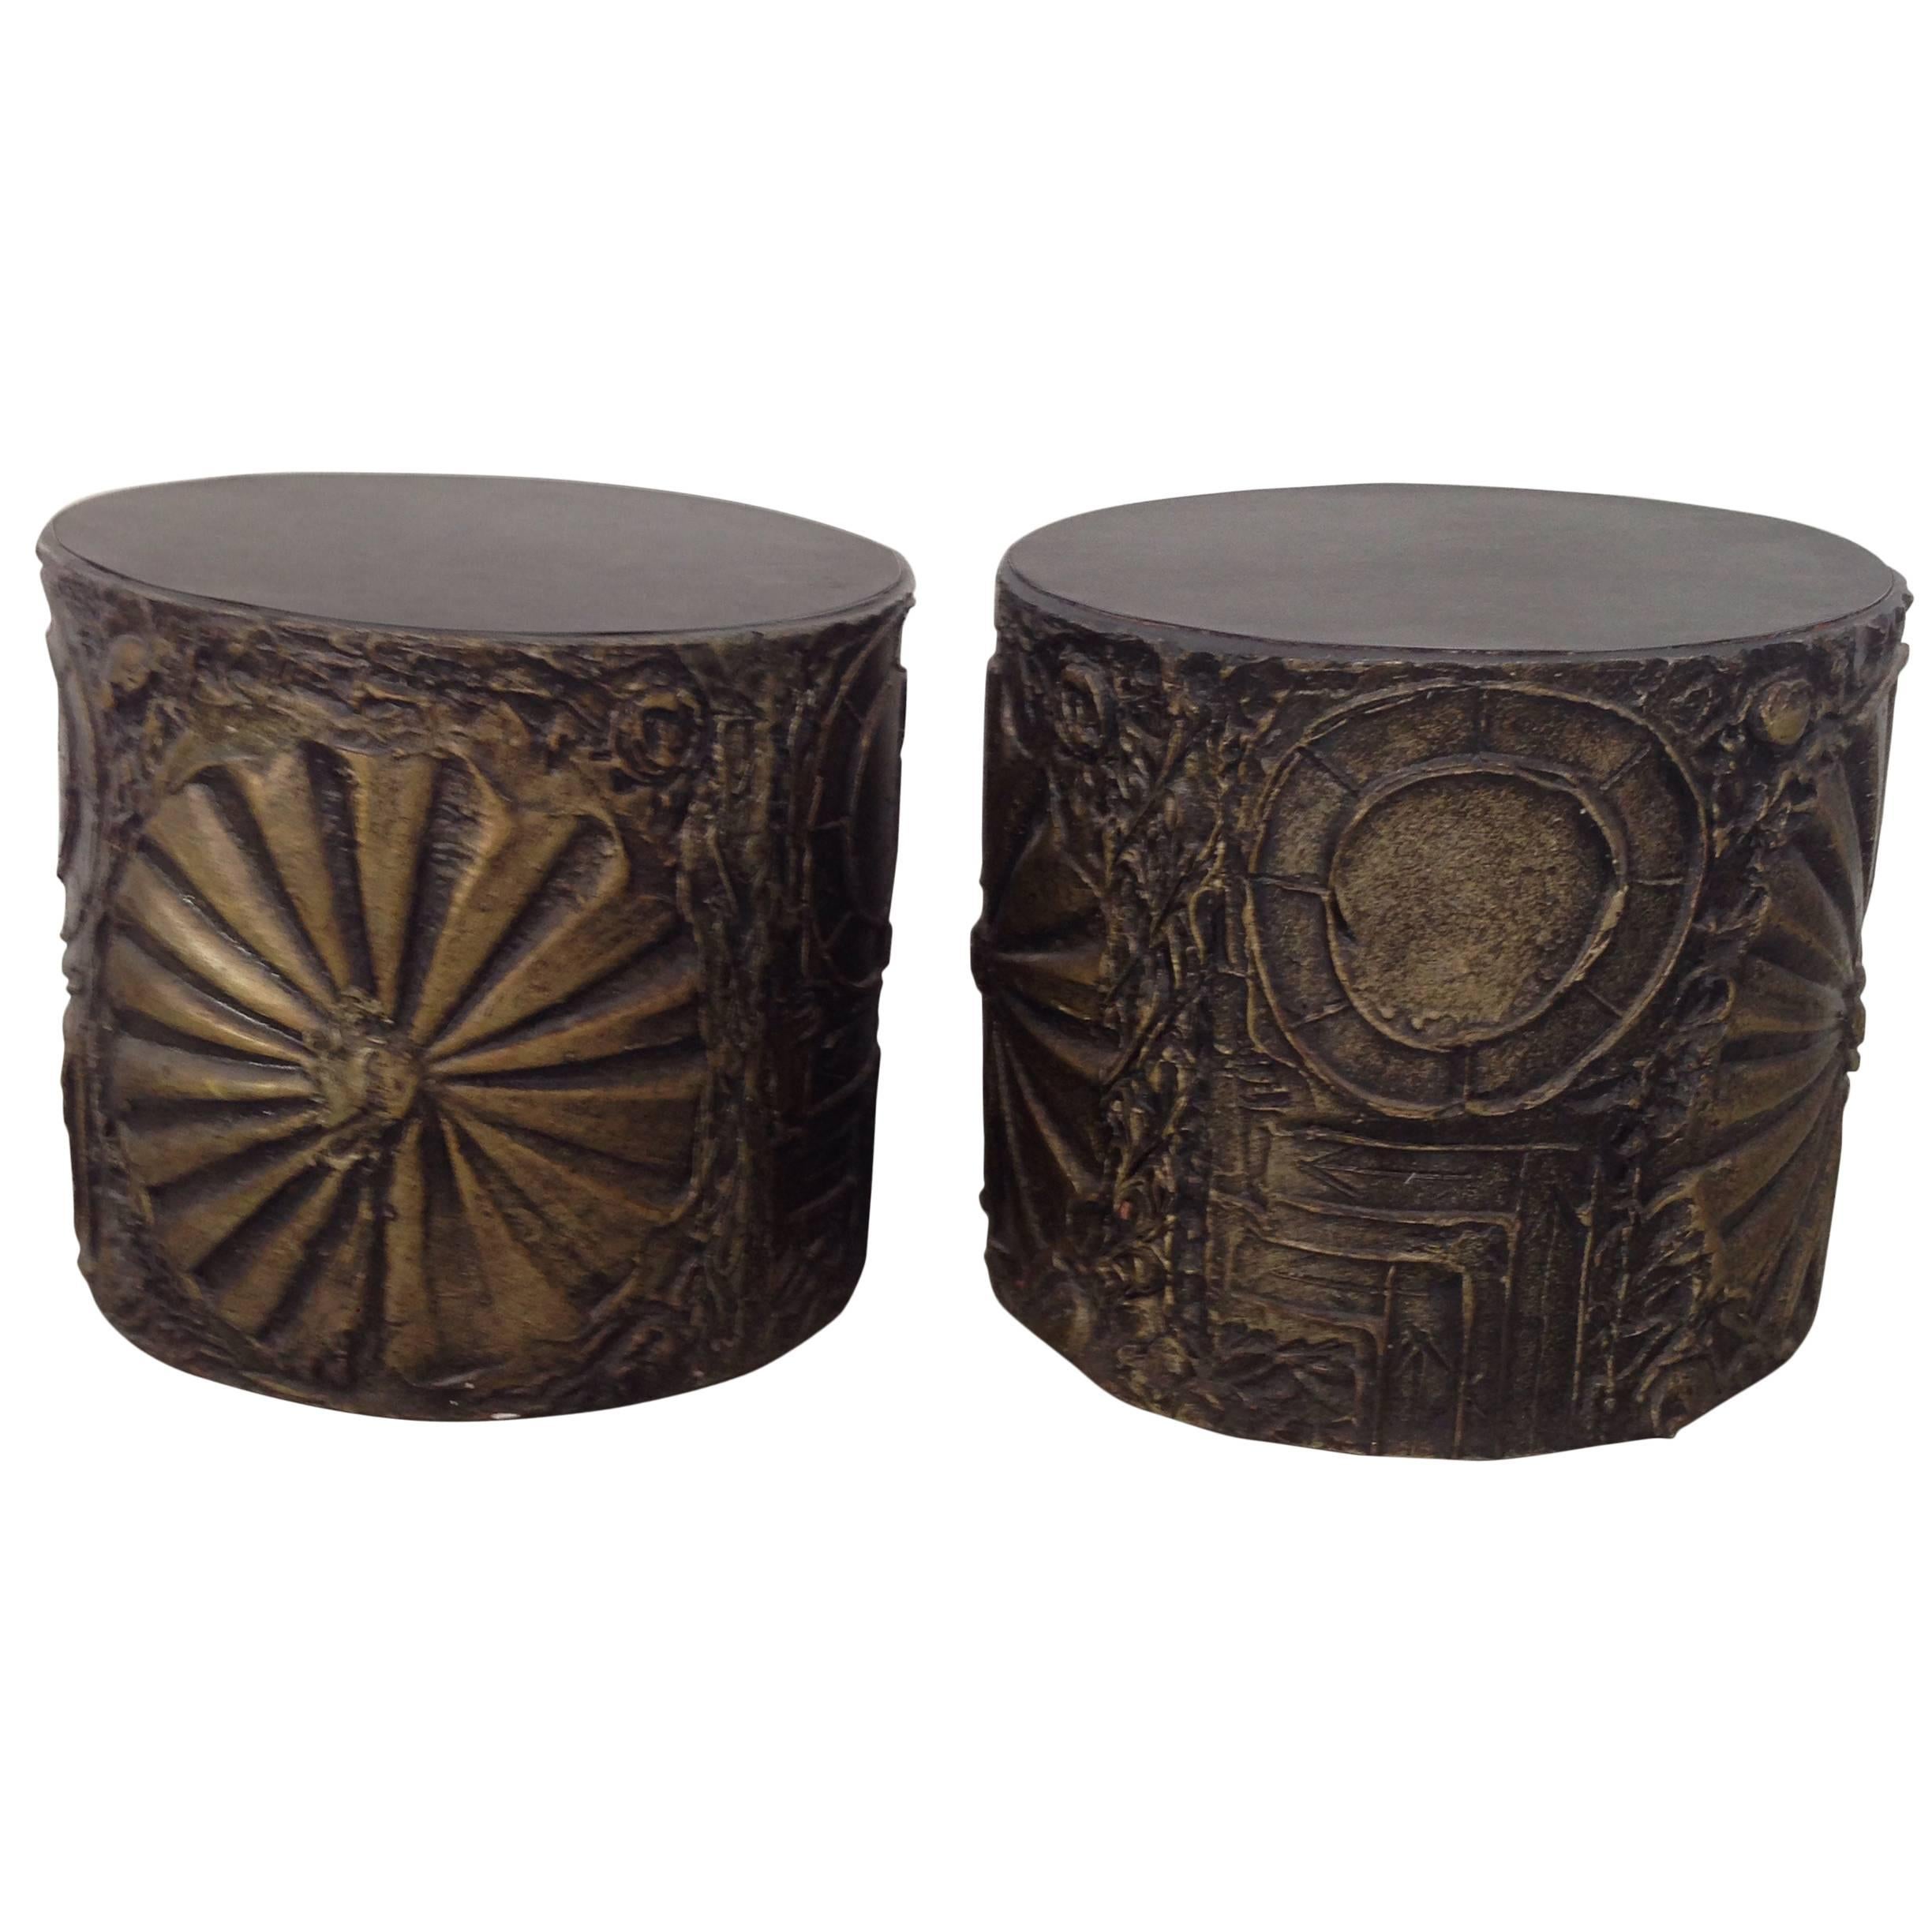 Brutalist Pair of Adrian Pearsall Side Tables for Craft Associates